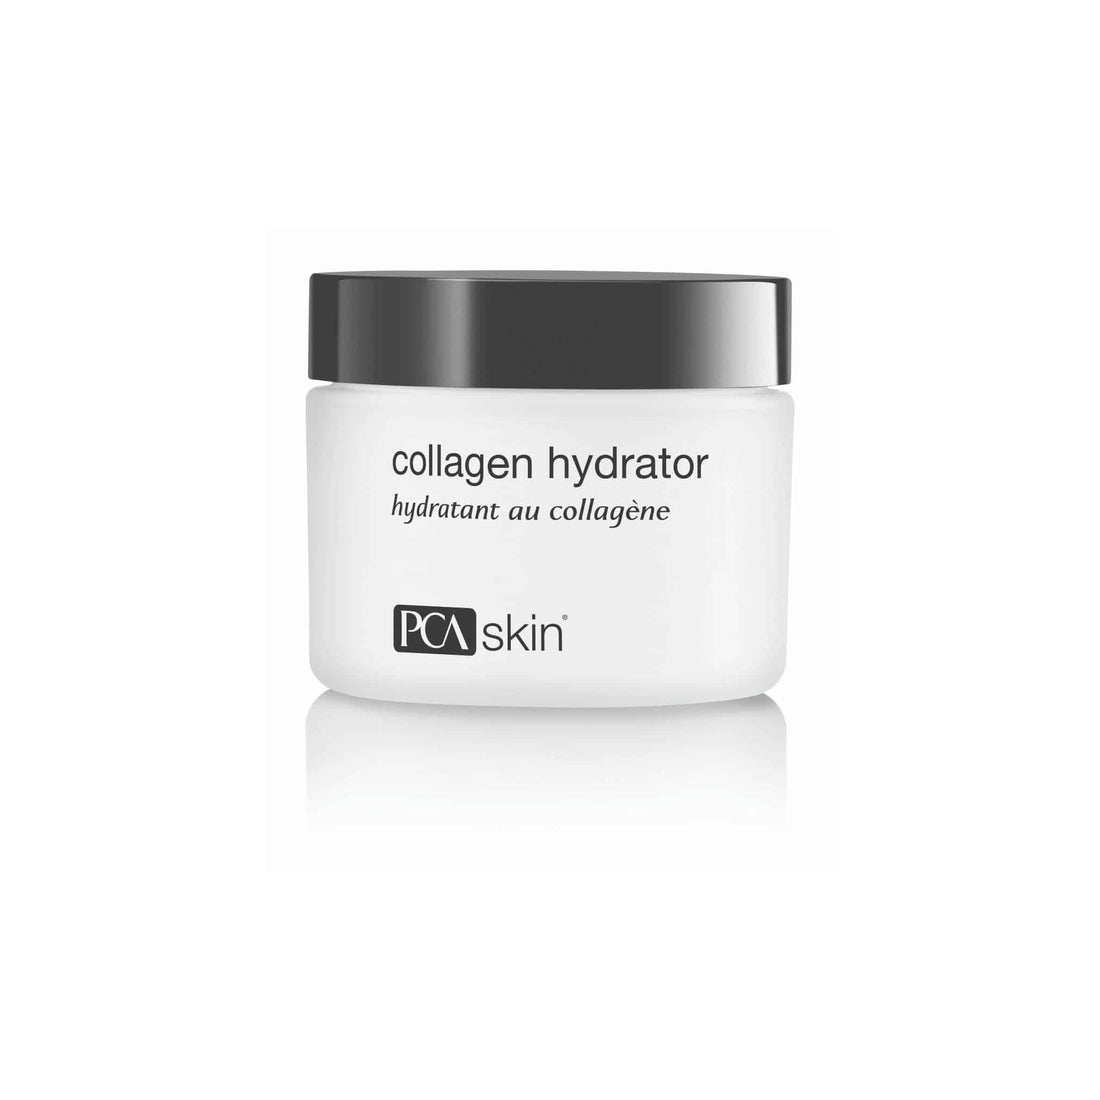 A white jar of Collagen Hydrator 48 g with a black lid is featured on a white background. The label, displaying &quot;collagen hydrator&quot; in both English and French alongside the PCA Skin logo, promises intense hydration for dry skin and mature skin alike.